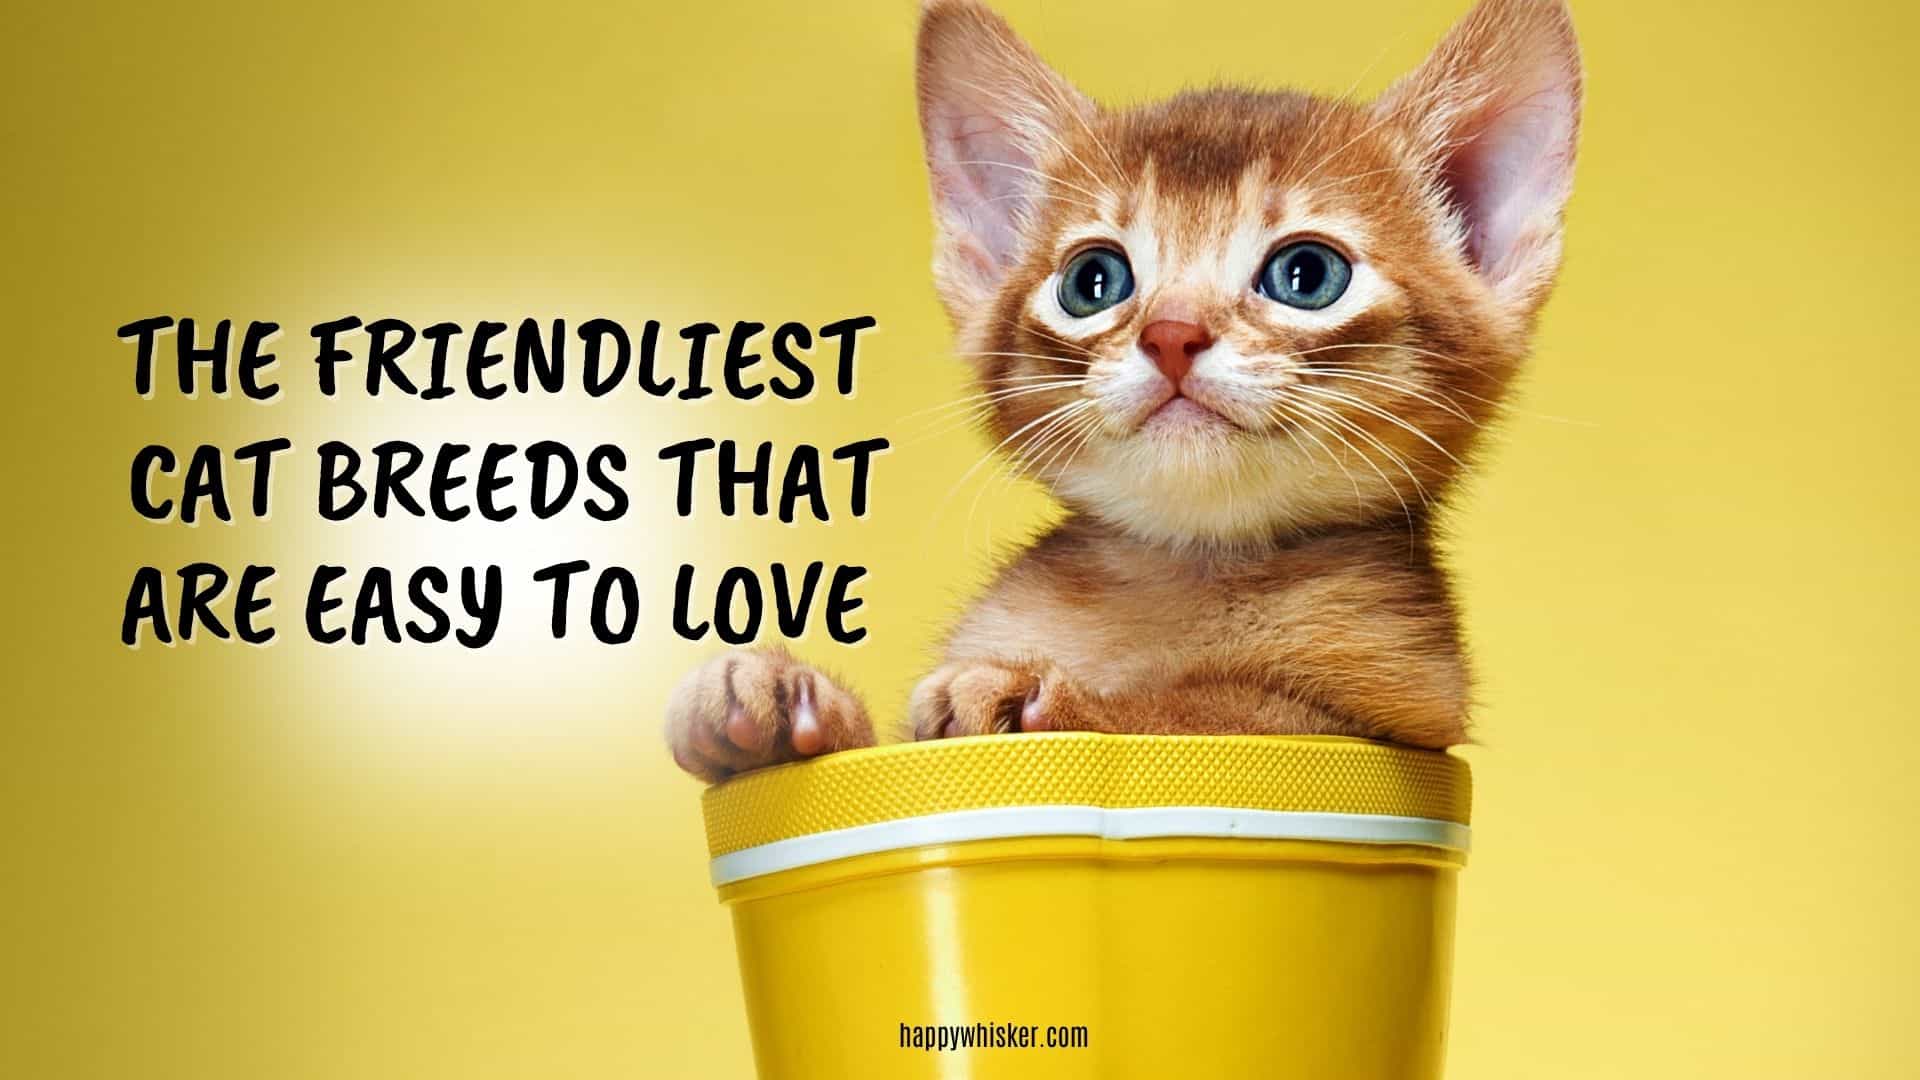 photo of a friendly cat, with yellow background